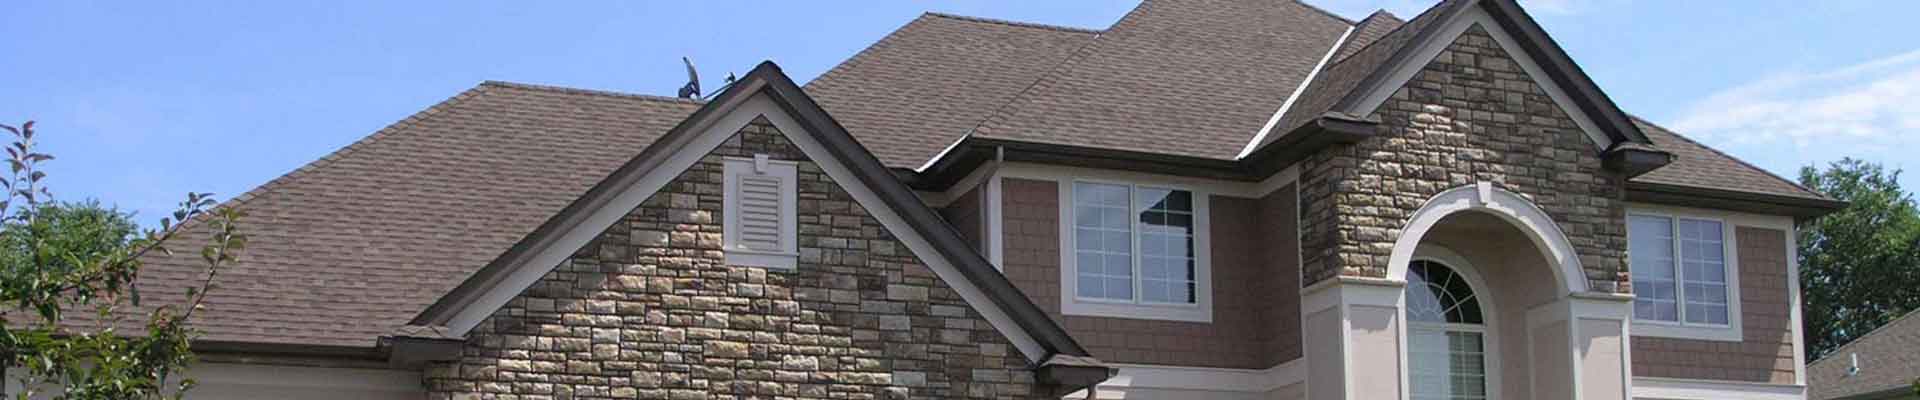 roofing in minneapolis